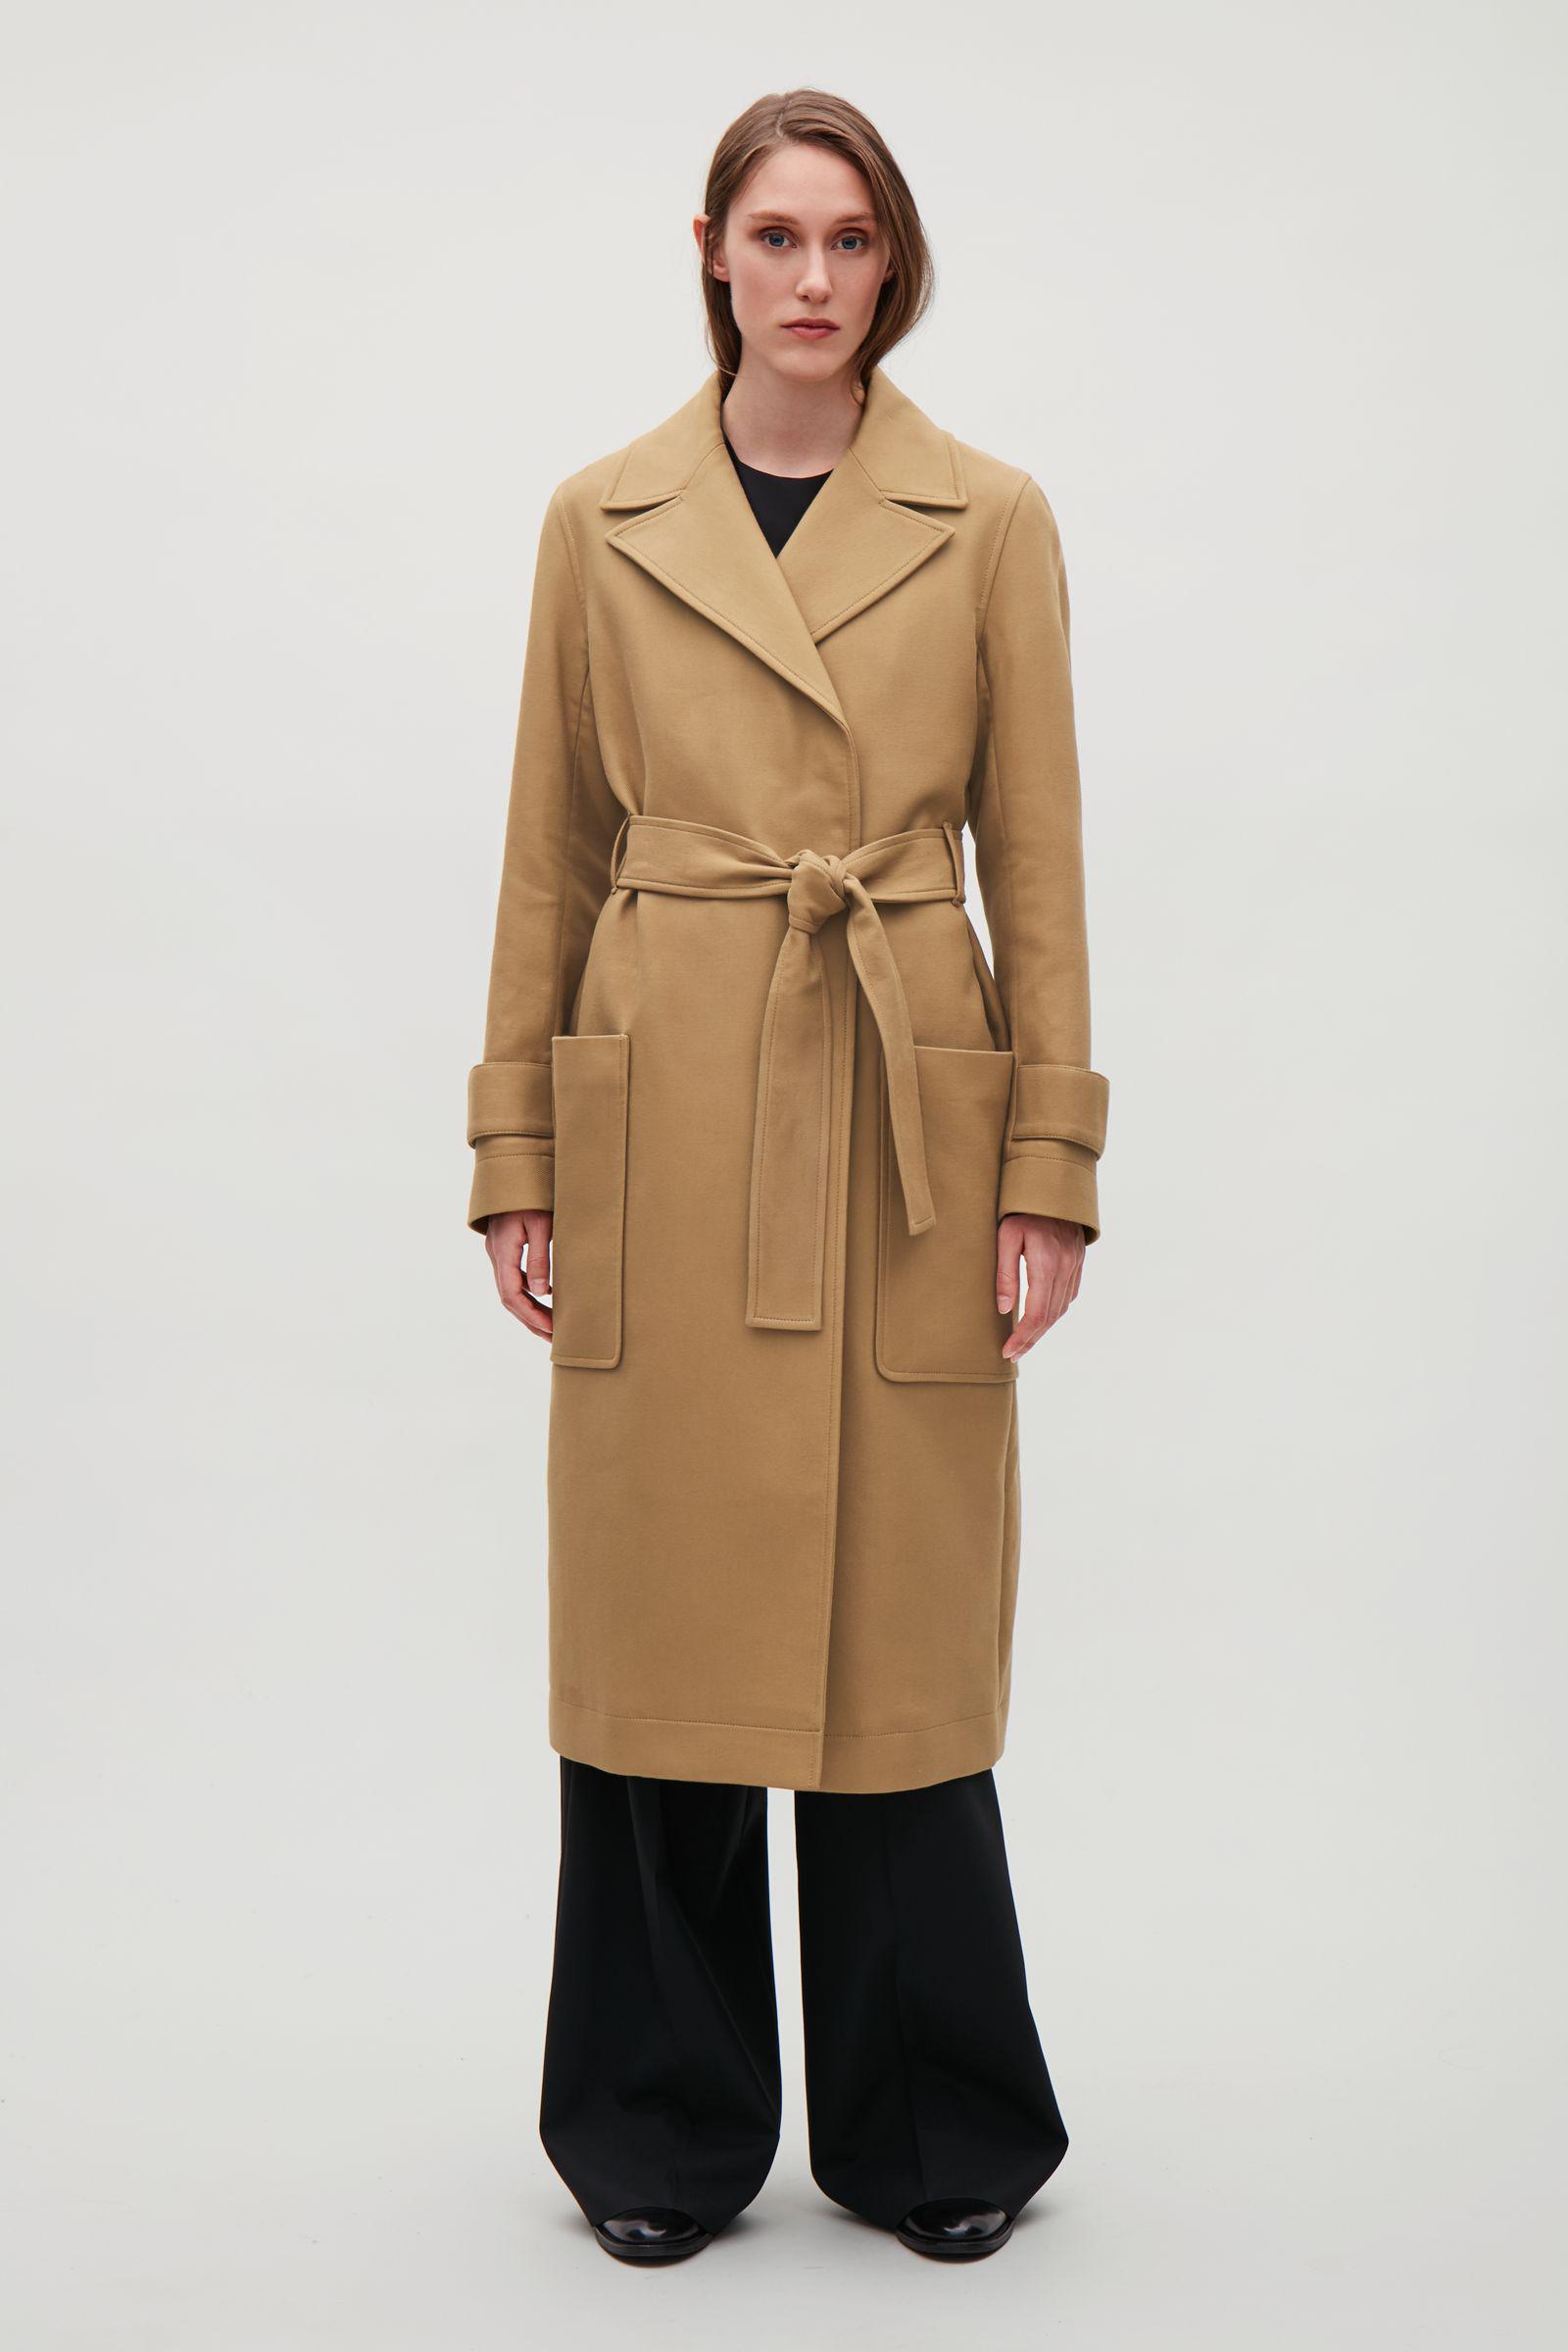 COS Trench Coat With Large Pockets in Natural | Lyst